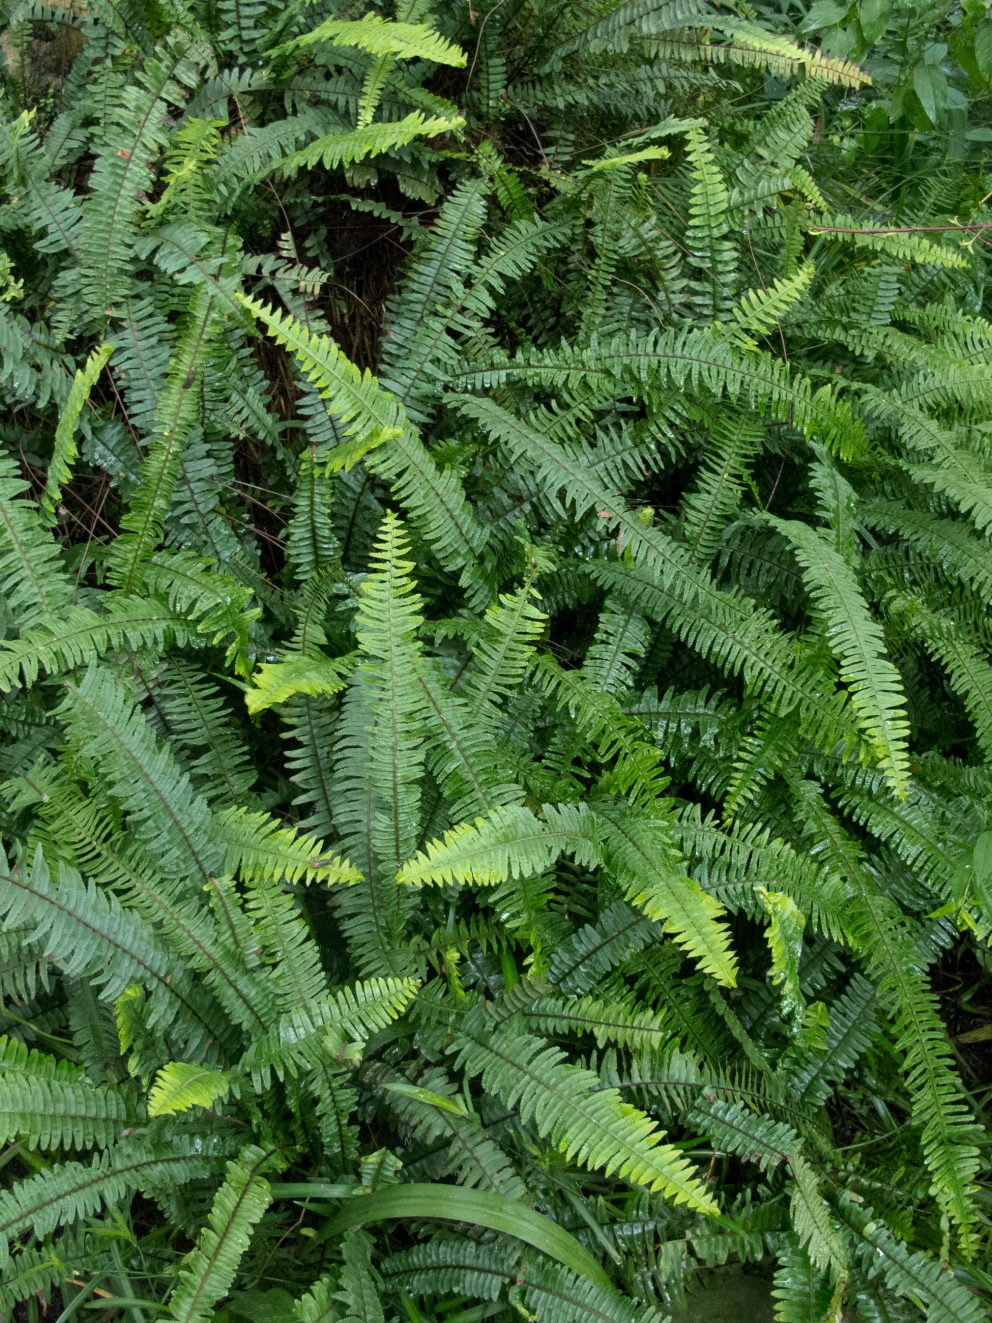 I was delighted to receive 3 lovely ferns in superb condition, still moist and strong and healthy, ingeniously packed in a sort of Wardian case made of cardboard. Will definitely order from the Palm Centre again.